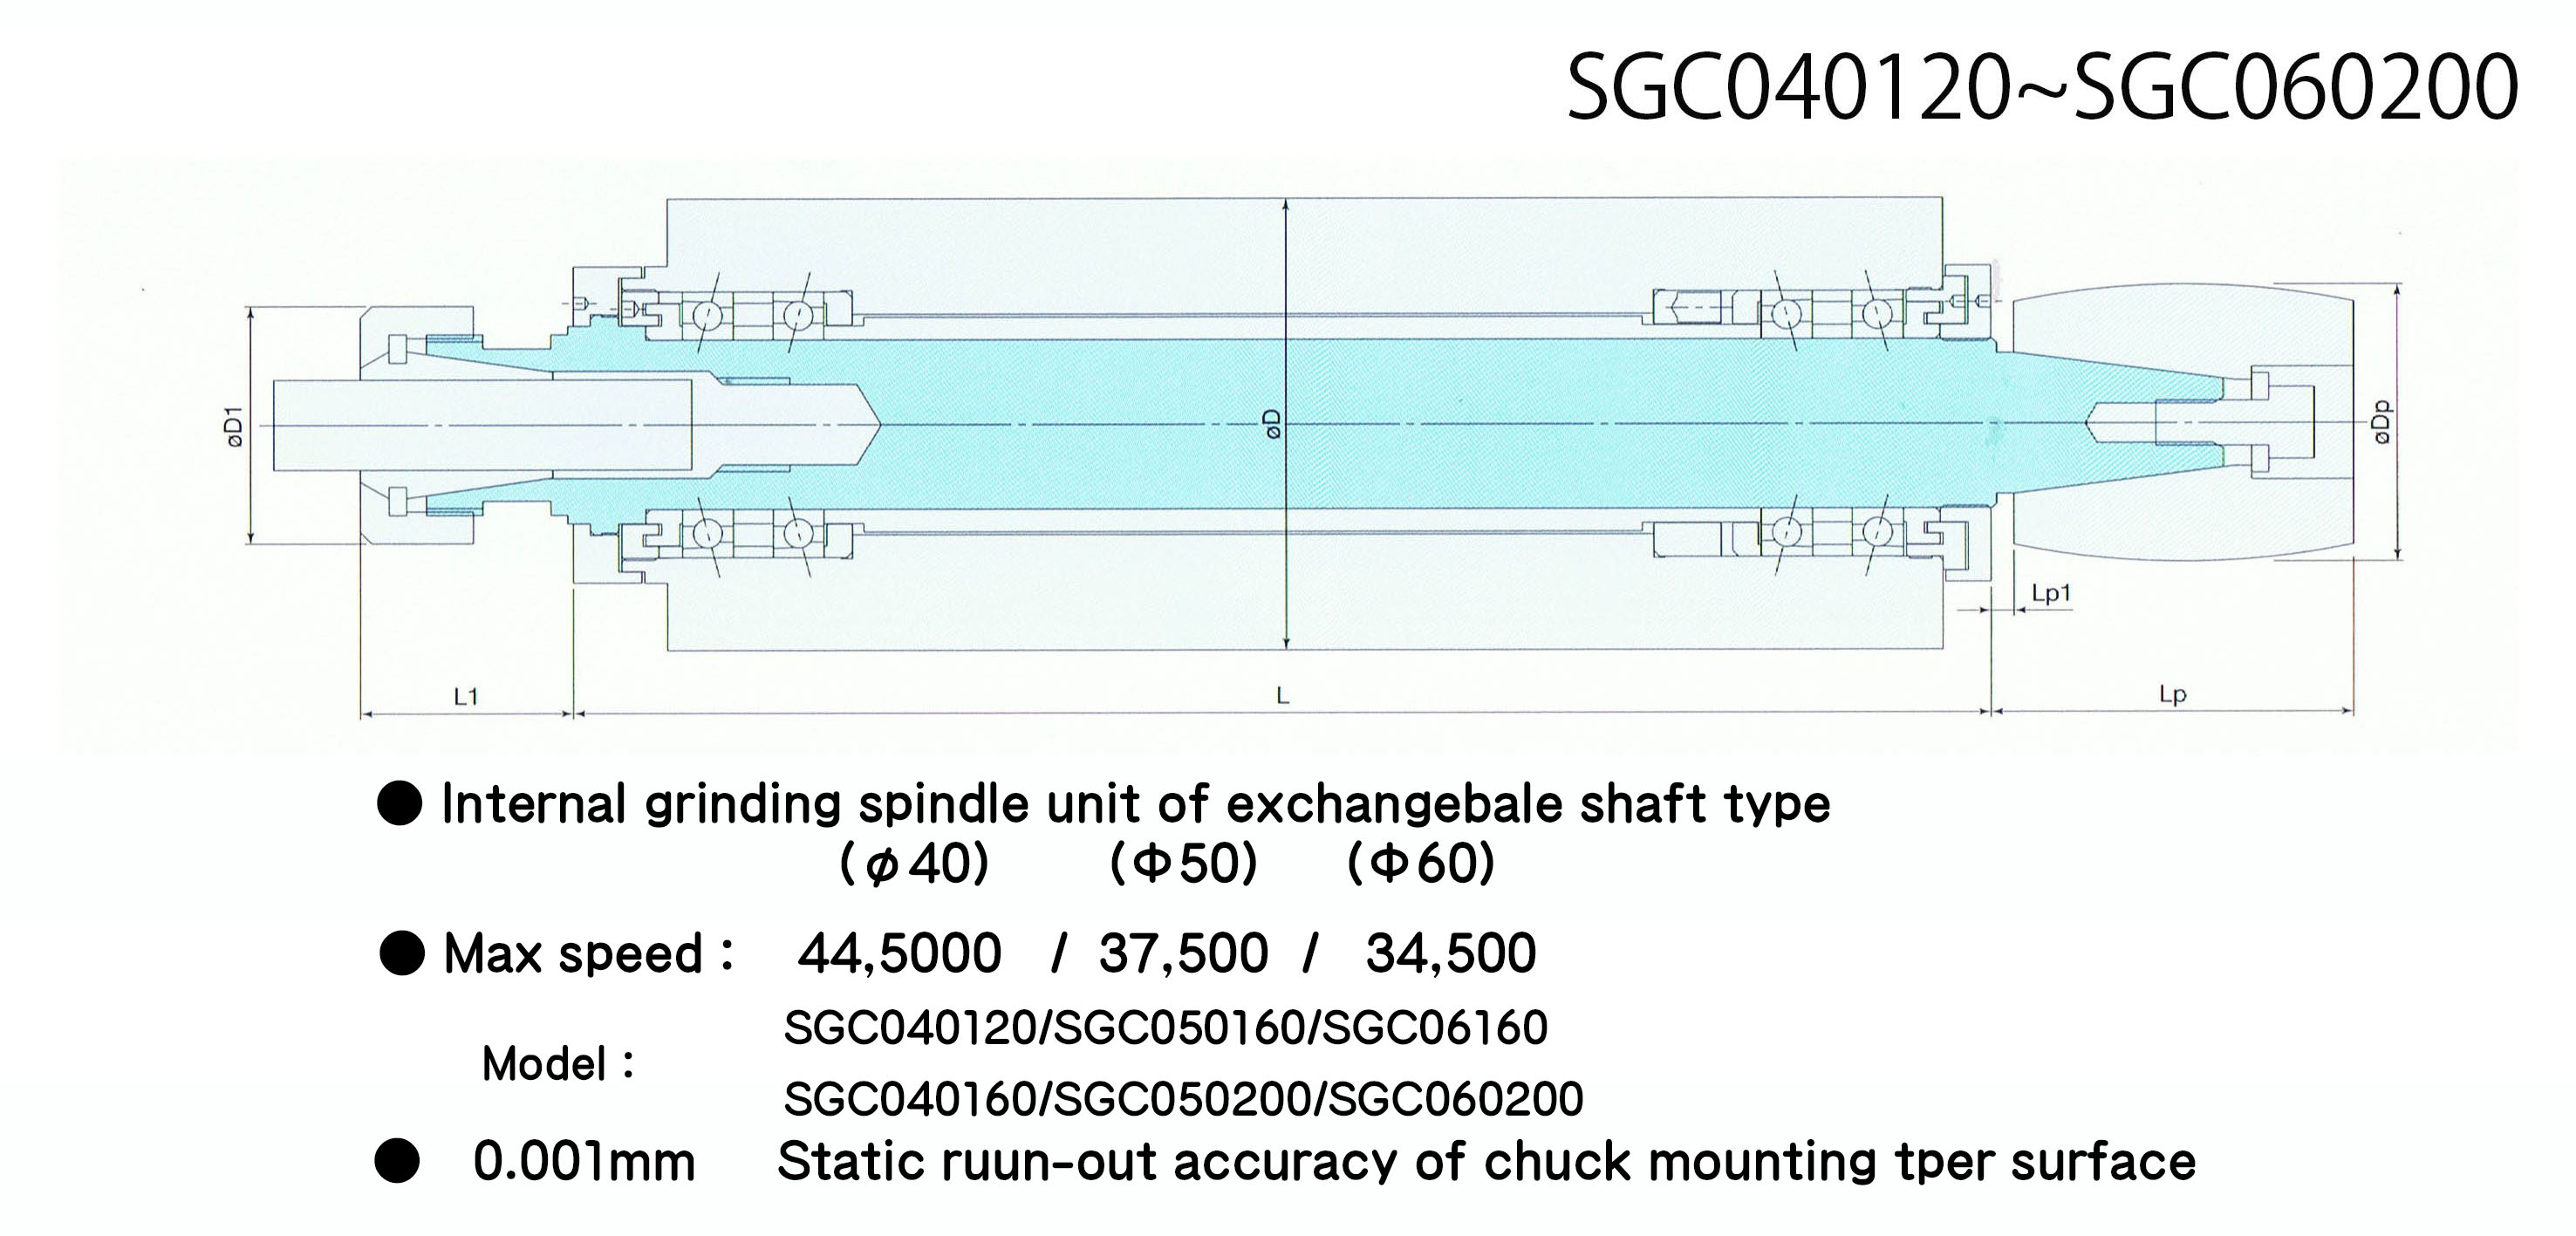 TECHNO SGC Pulley Spindle (SIGMA)